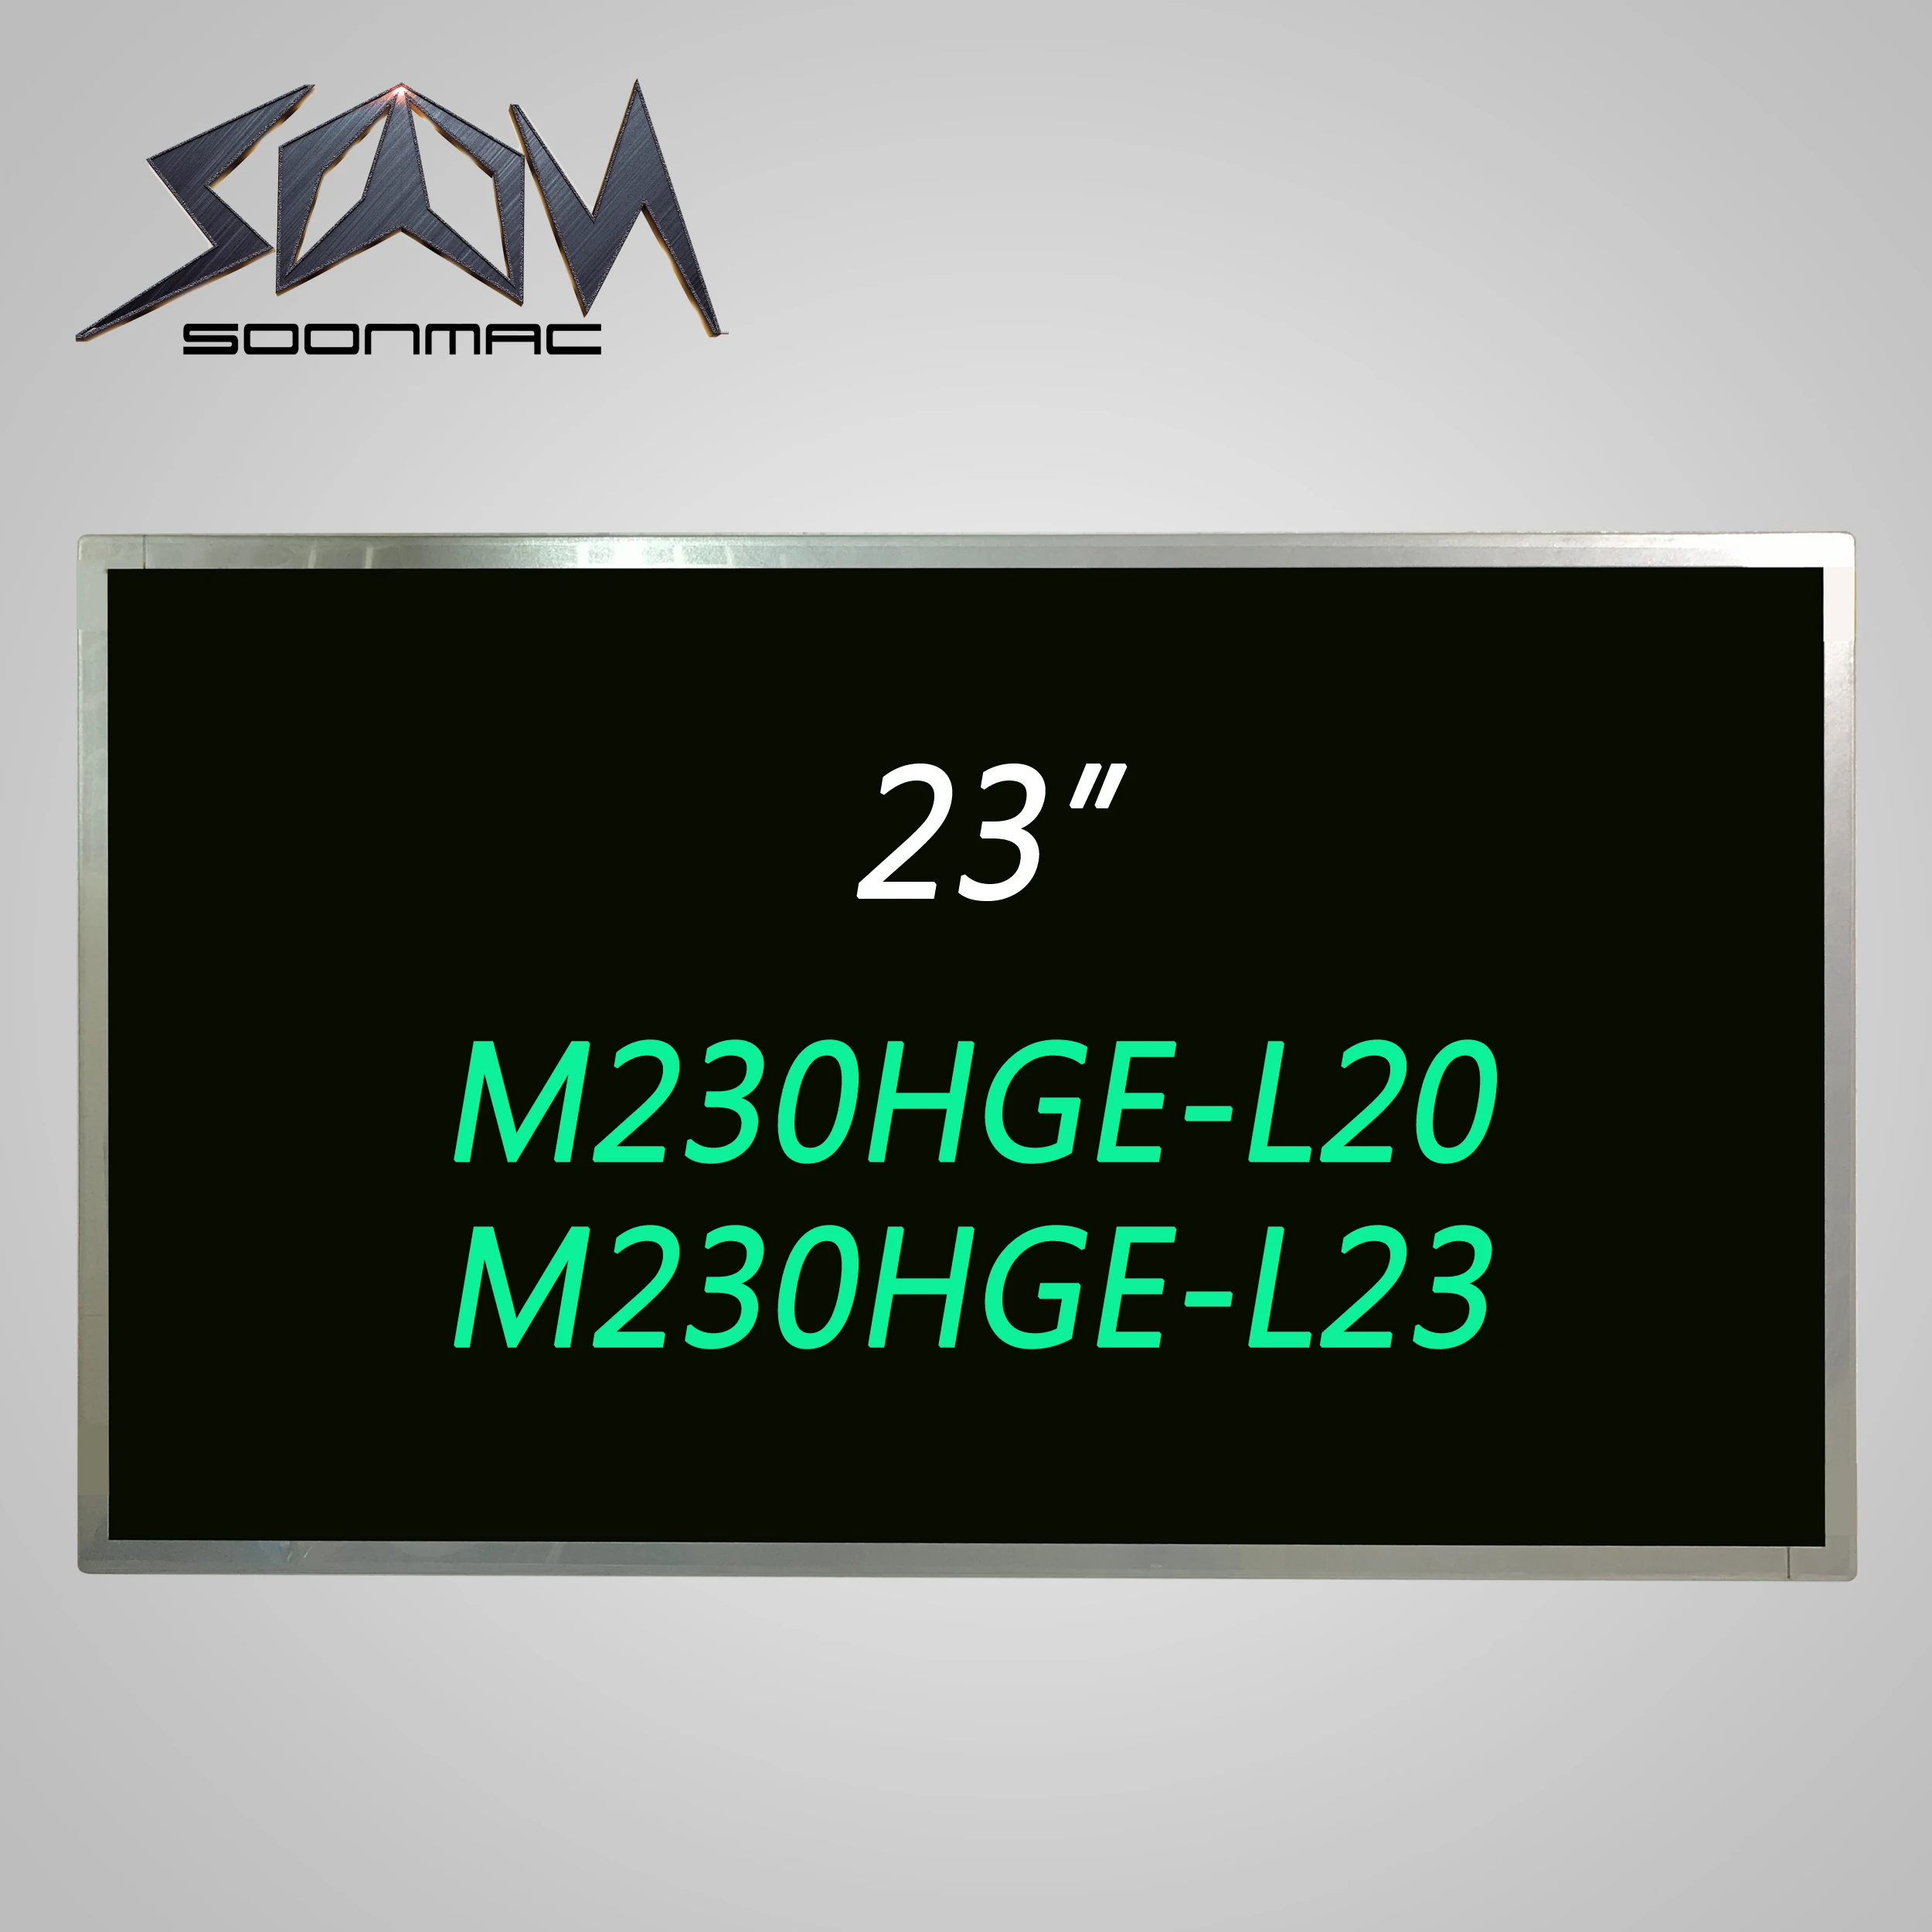 New 23" LCD Screen M230HGE-L20 M230HGE-L23 Display Replacement for Dell Inspiron One 2330 ALL-IN-ONE Monitor AIO Panel